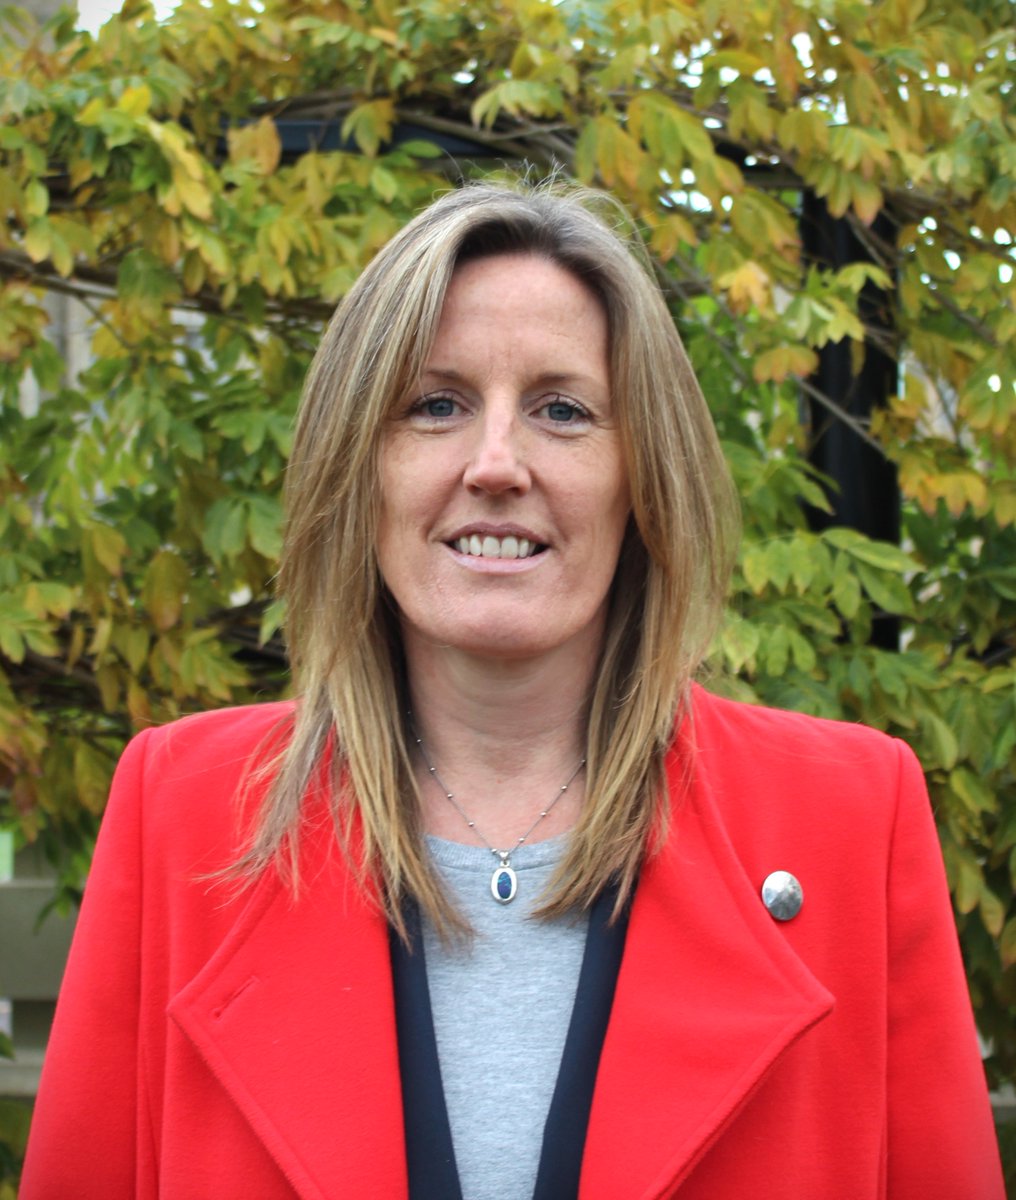 The Governors of The Leys and St Faith’s Schools Foundation are delighted to announce the appointment of Dr Clare Ives to succeed @LeysHeadmaster as Head of The Leys when he retires after almost 12 years of dedicated service in September 2025. Read more: tinyurl.com/54eacte3